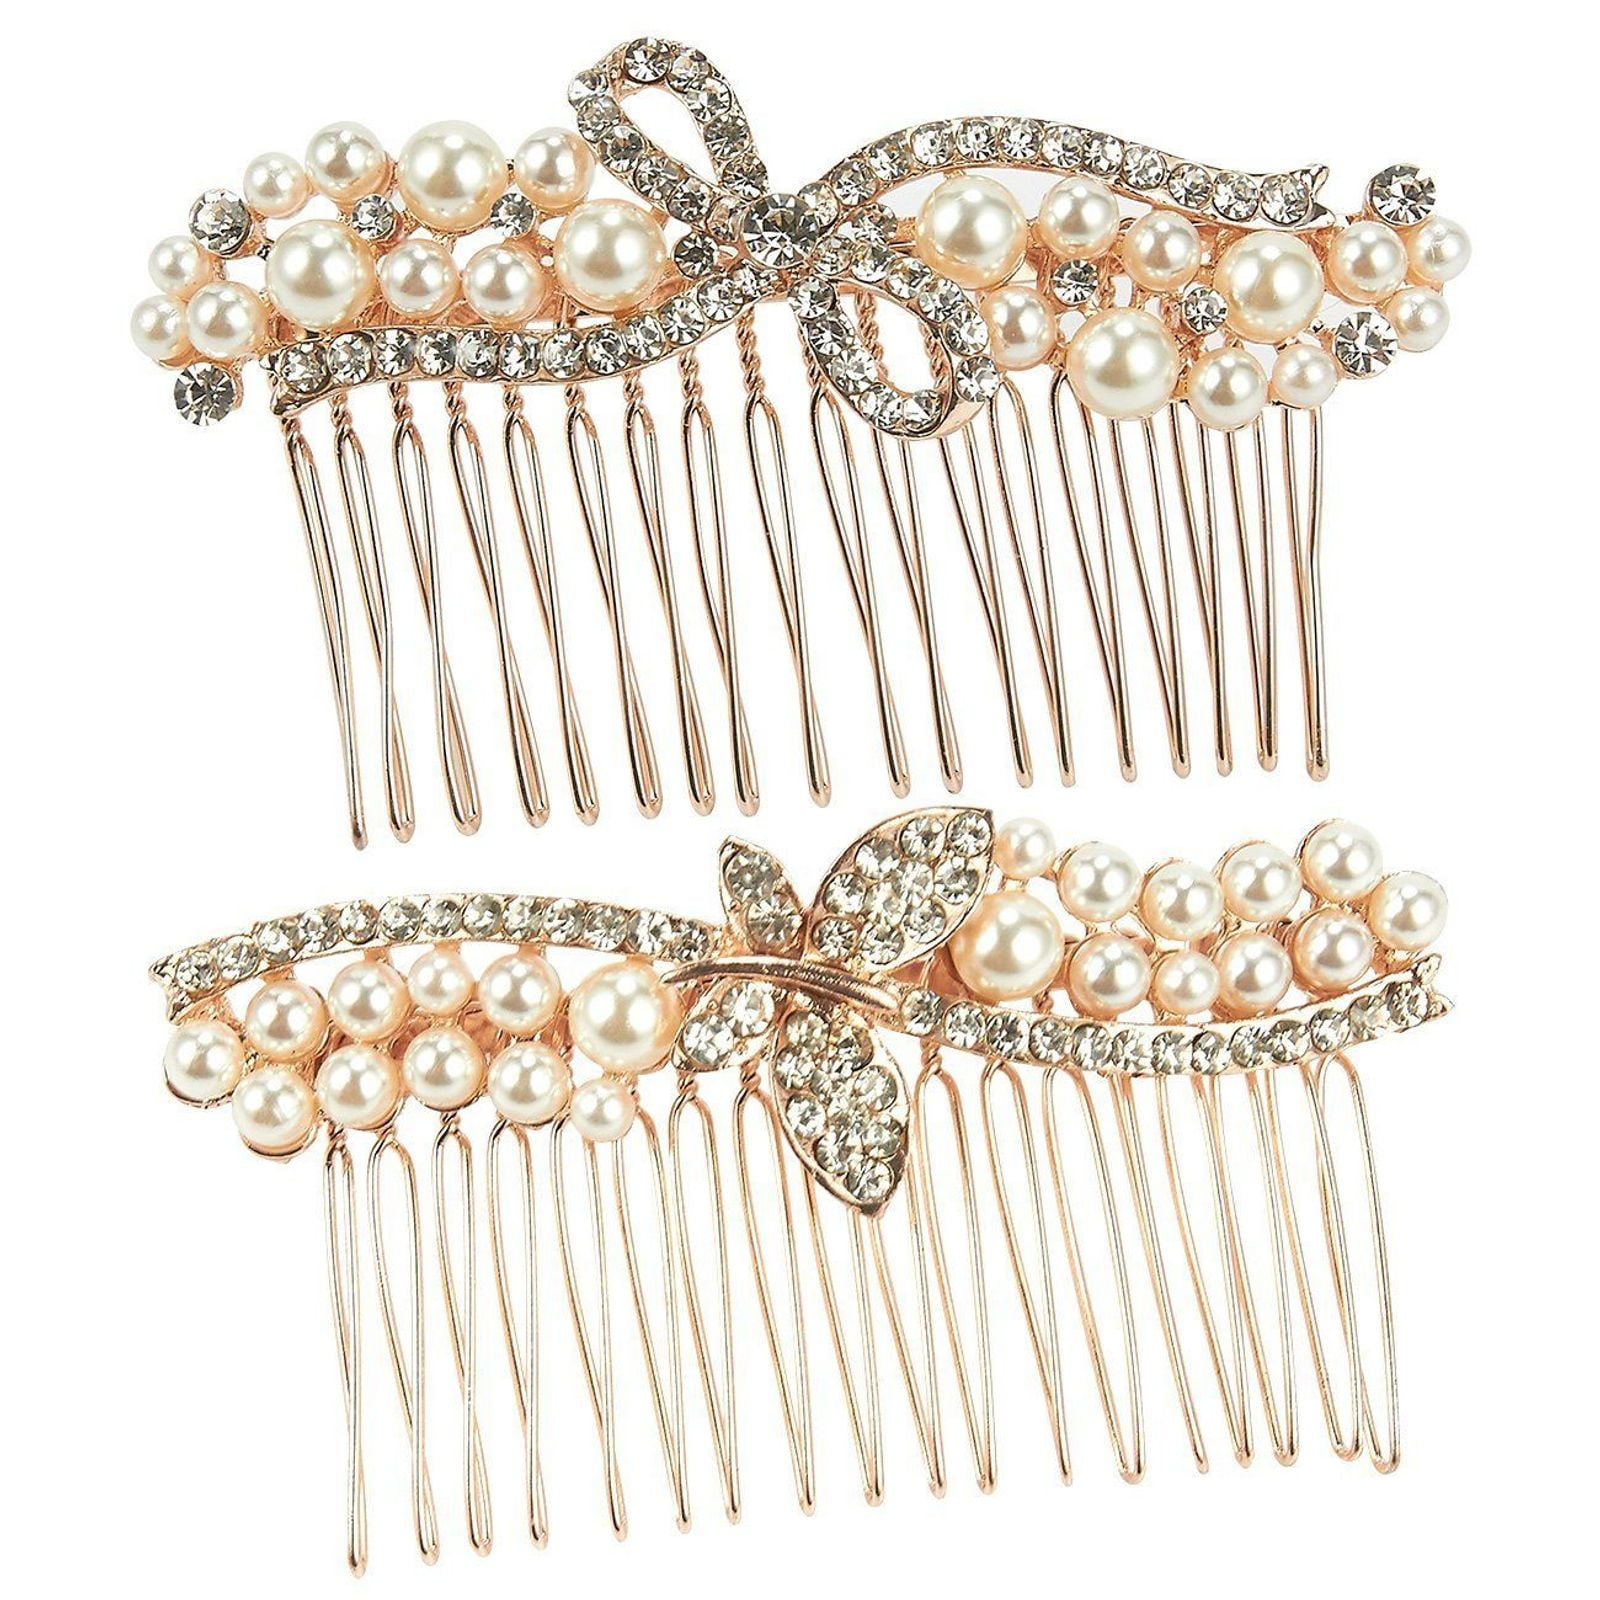 BRAND NEW IN PACKAGE 3.25 inch Crystal/Rhinestone Hair Clip LAST ONE AVAILABLE